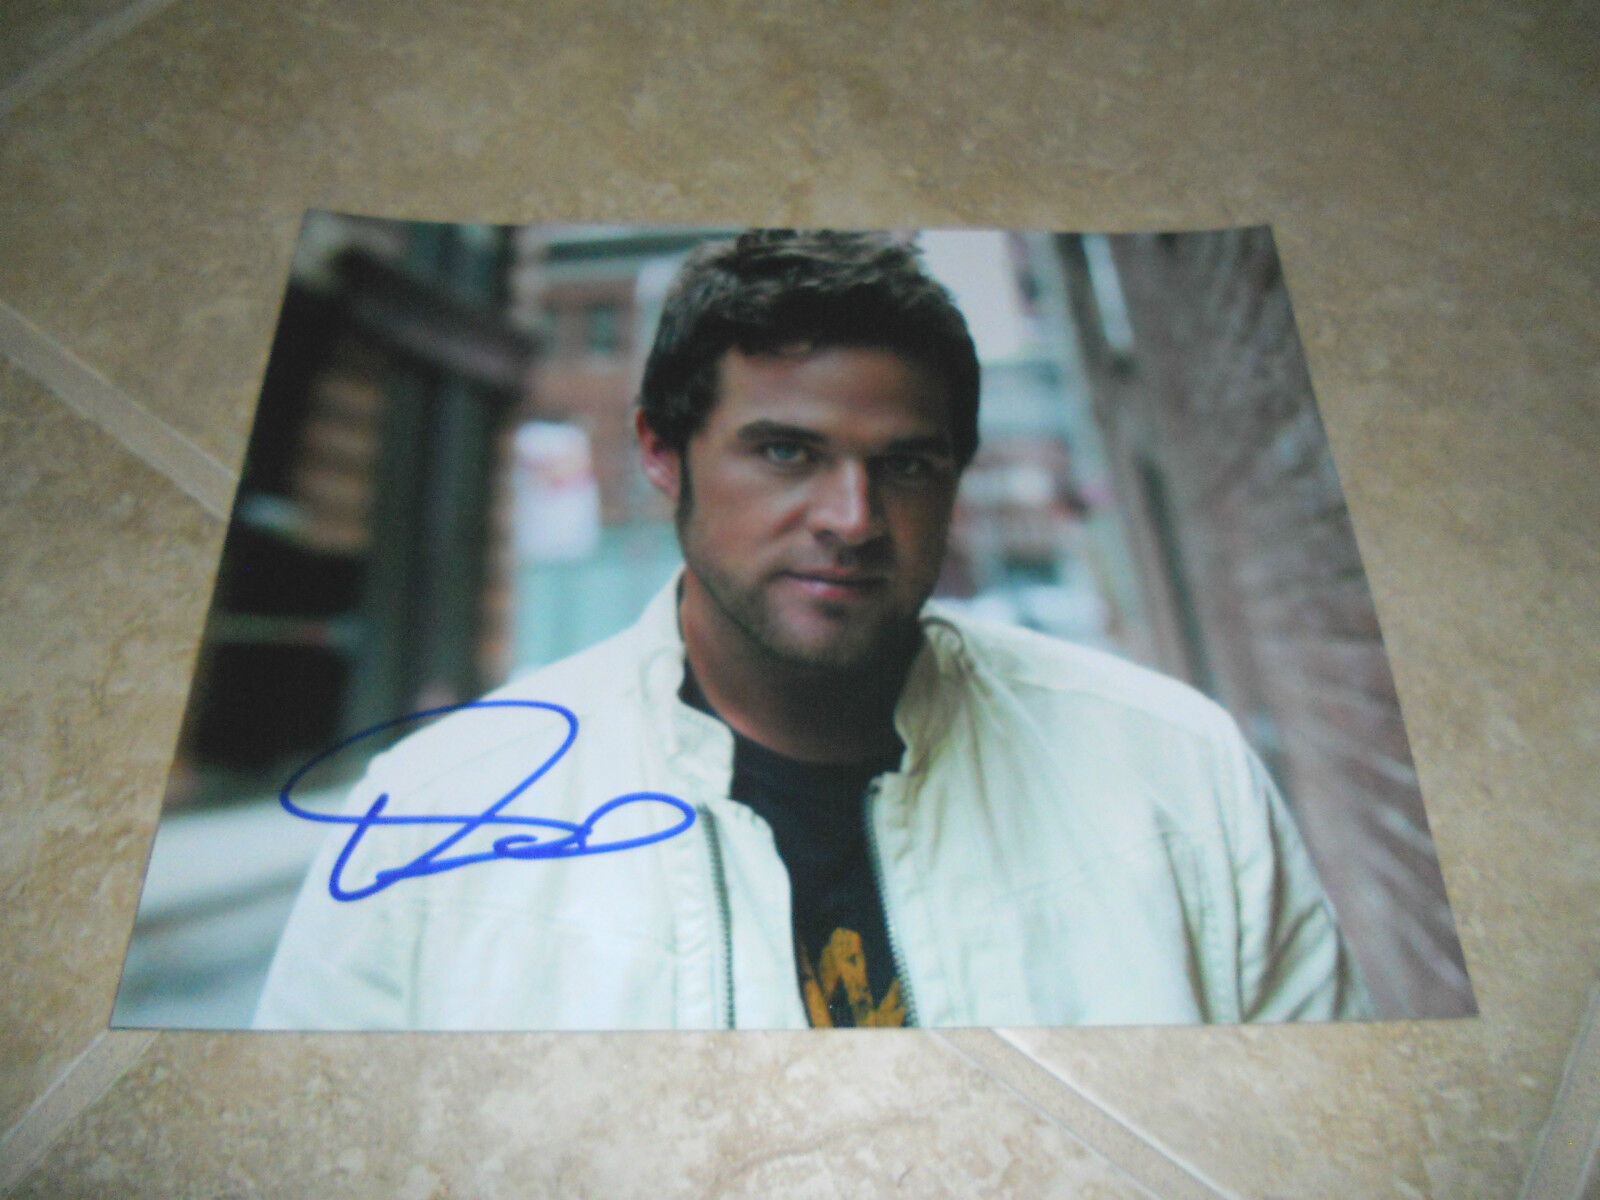 David Nail Sexy Signed Autographed 8x10 Color Photo Poster painting PSA Guaranteed #1